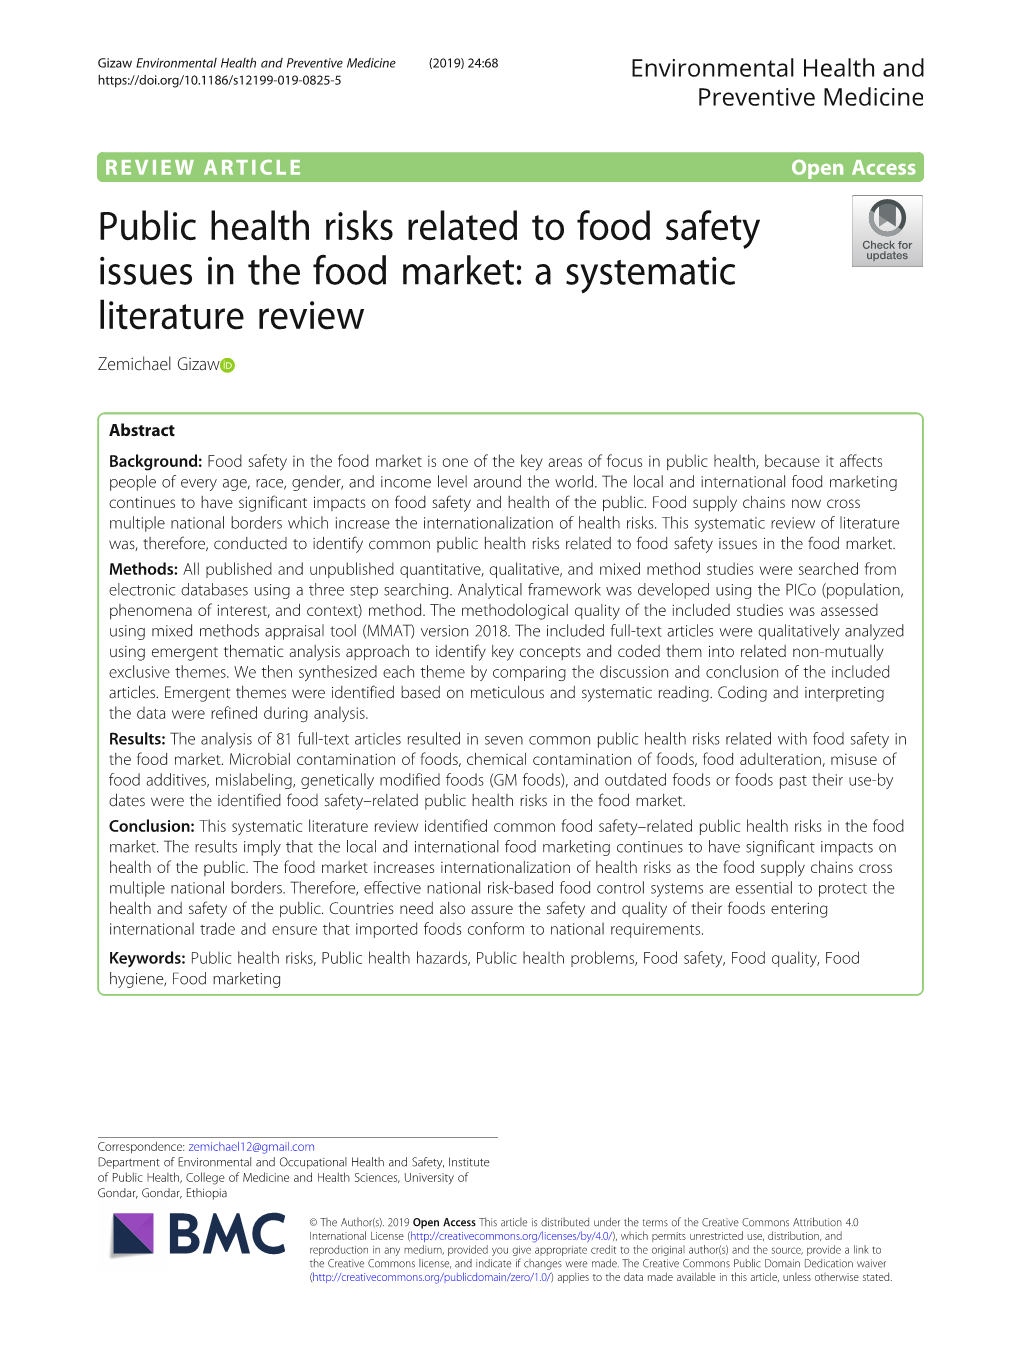 Public Health Risks Related to Food Safety Issues in the Food Market: a Systematic Literature Review Zemichael Gizaw